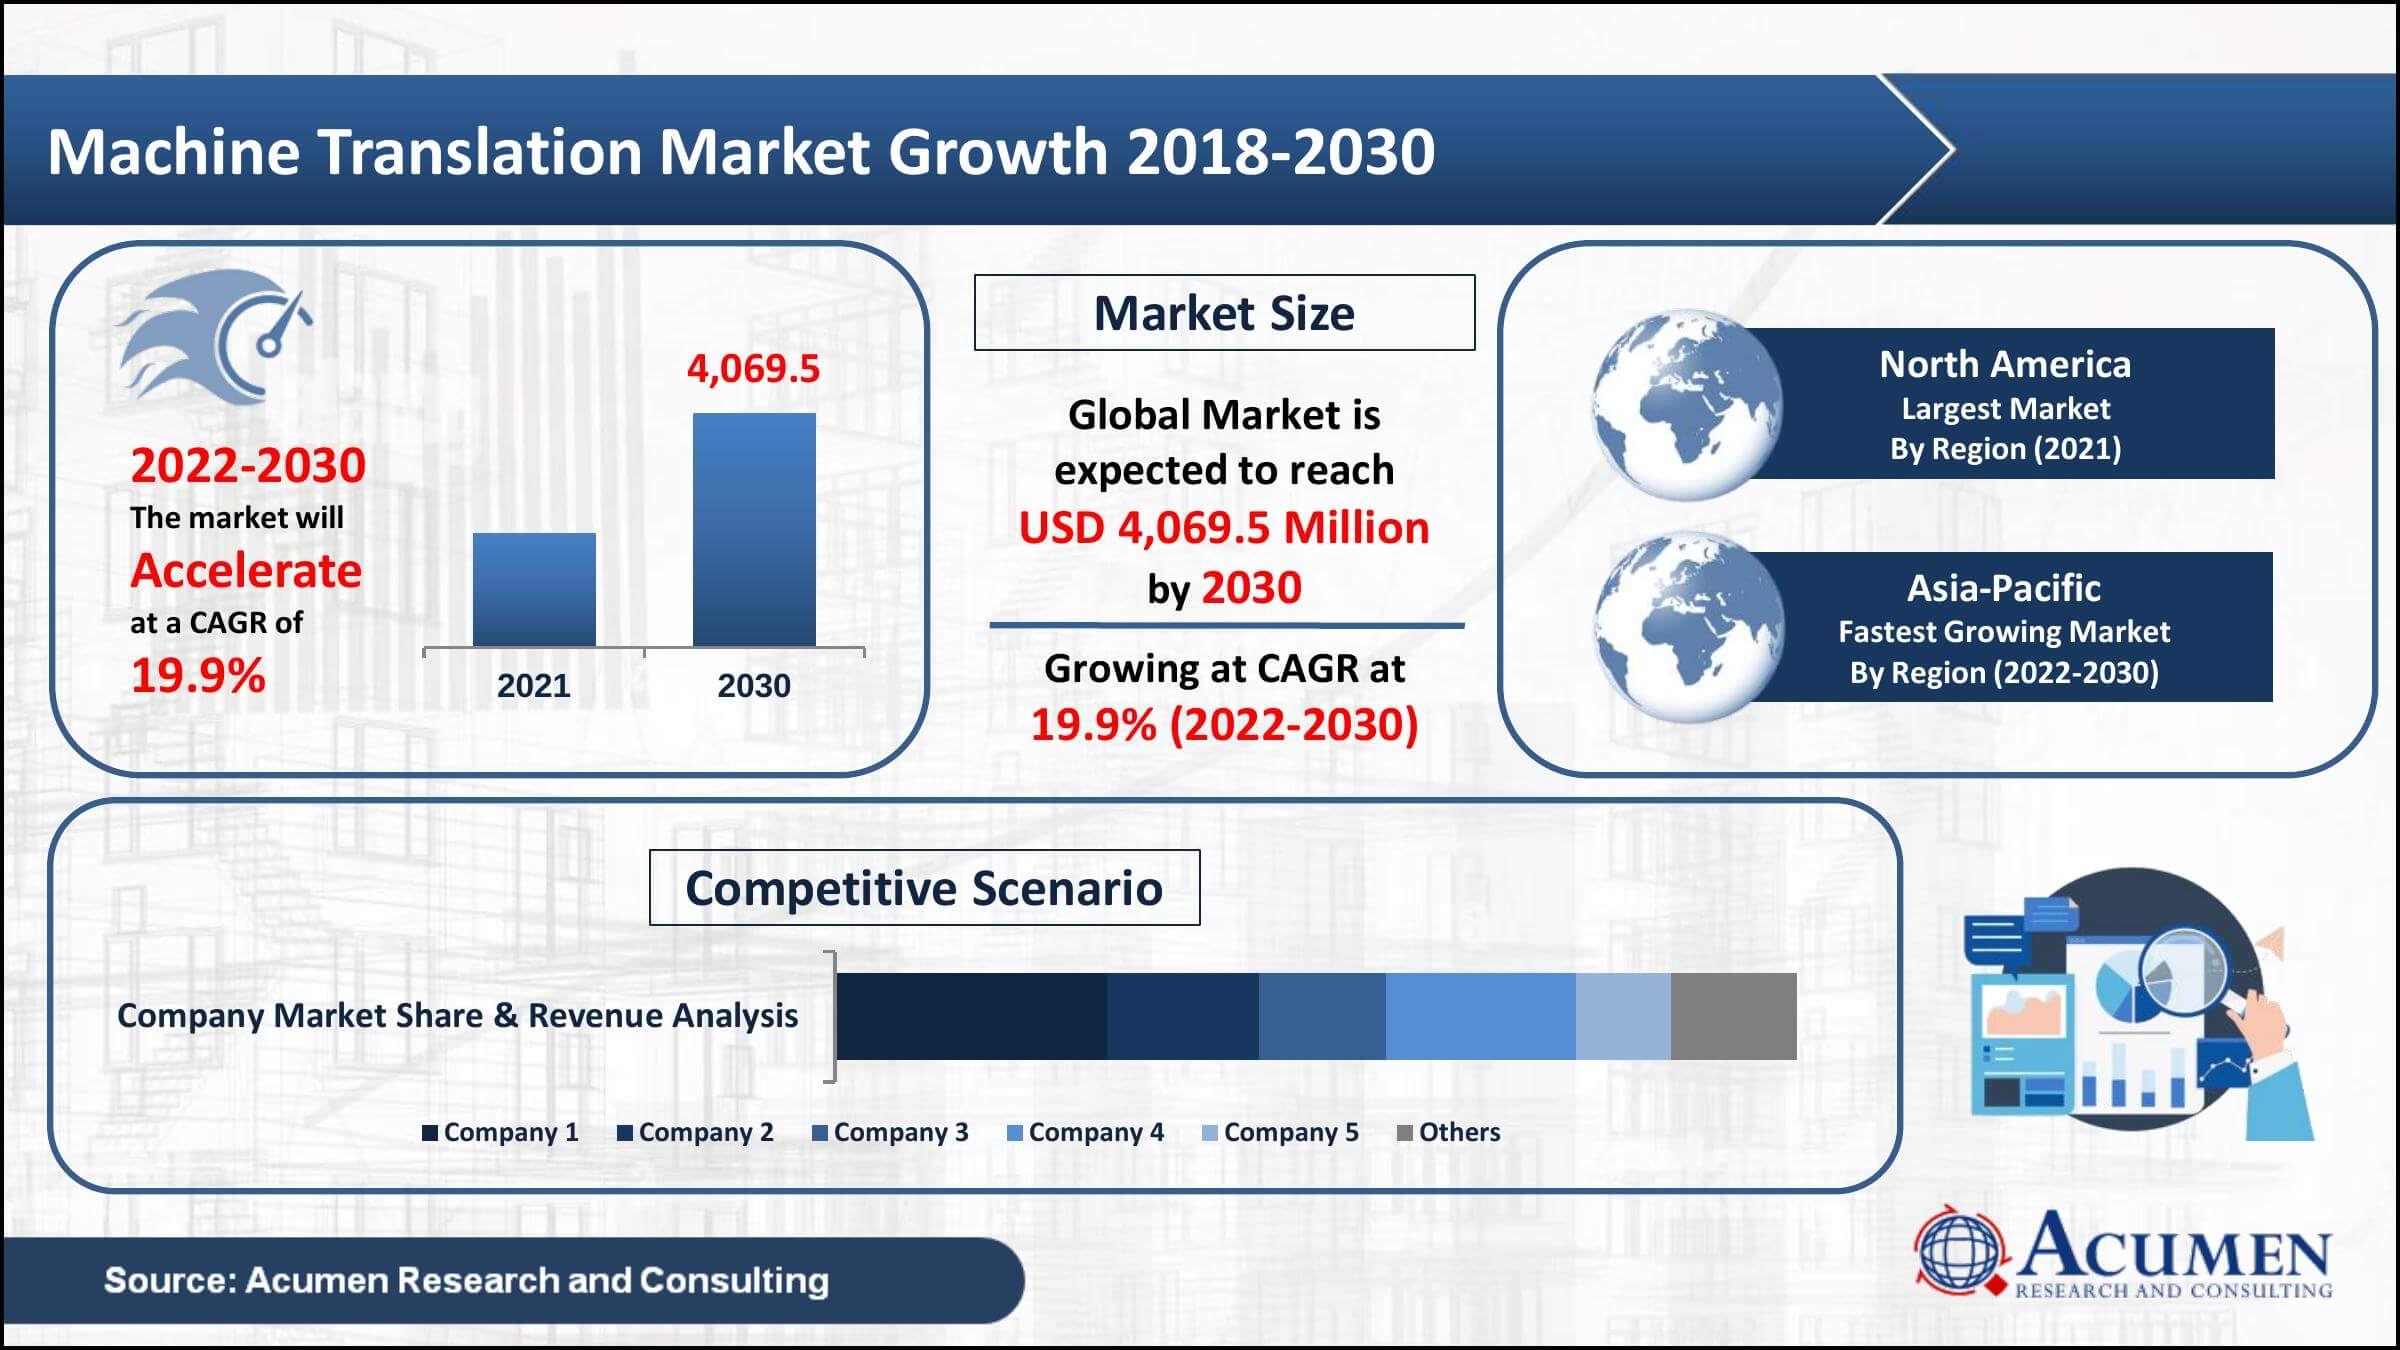 Global machine translation market revenue collected USD 812.6 Million in 2021, with a 19.9% CAGR between 2022 and 2030